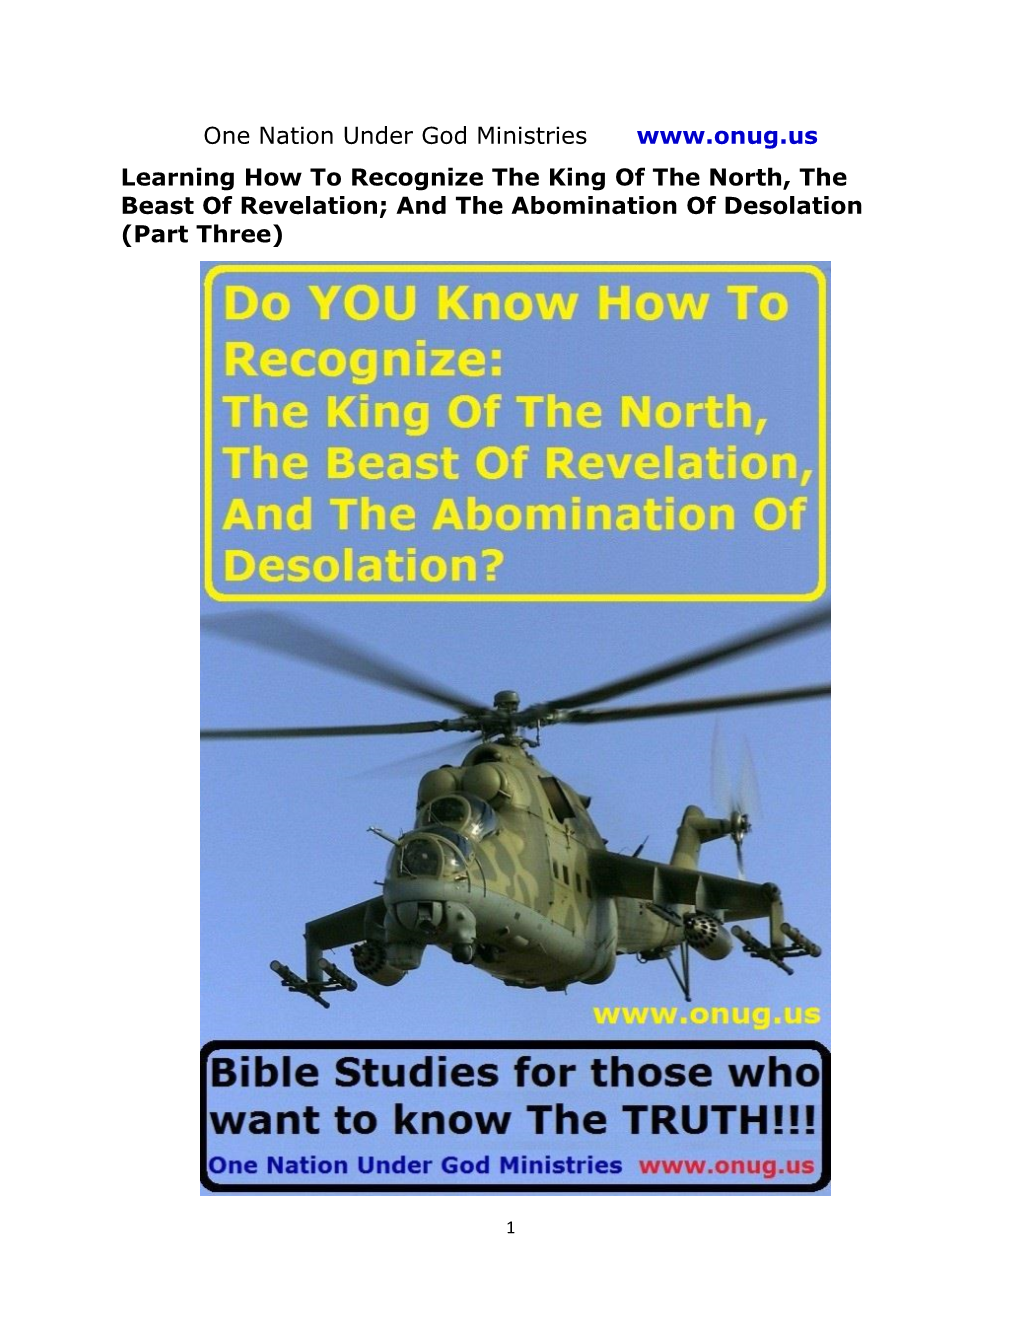 One Nation Under God Ministries Learning How to Recognize the King of the North, the Beast of Revelation; and the Abomination of Desolation (Part Three)